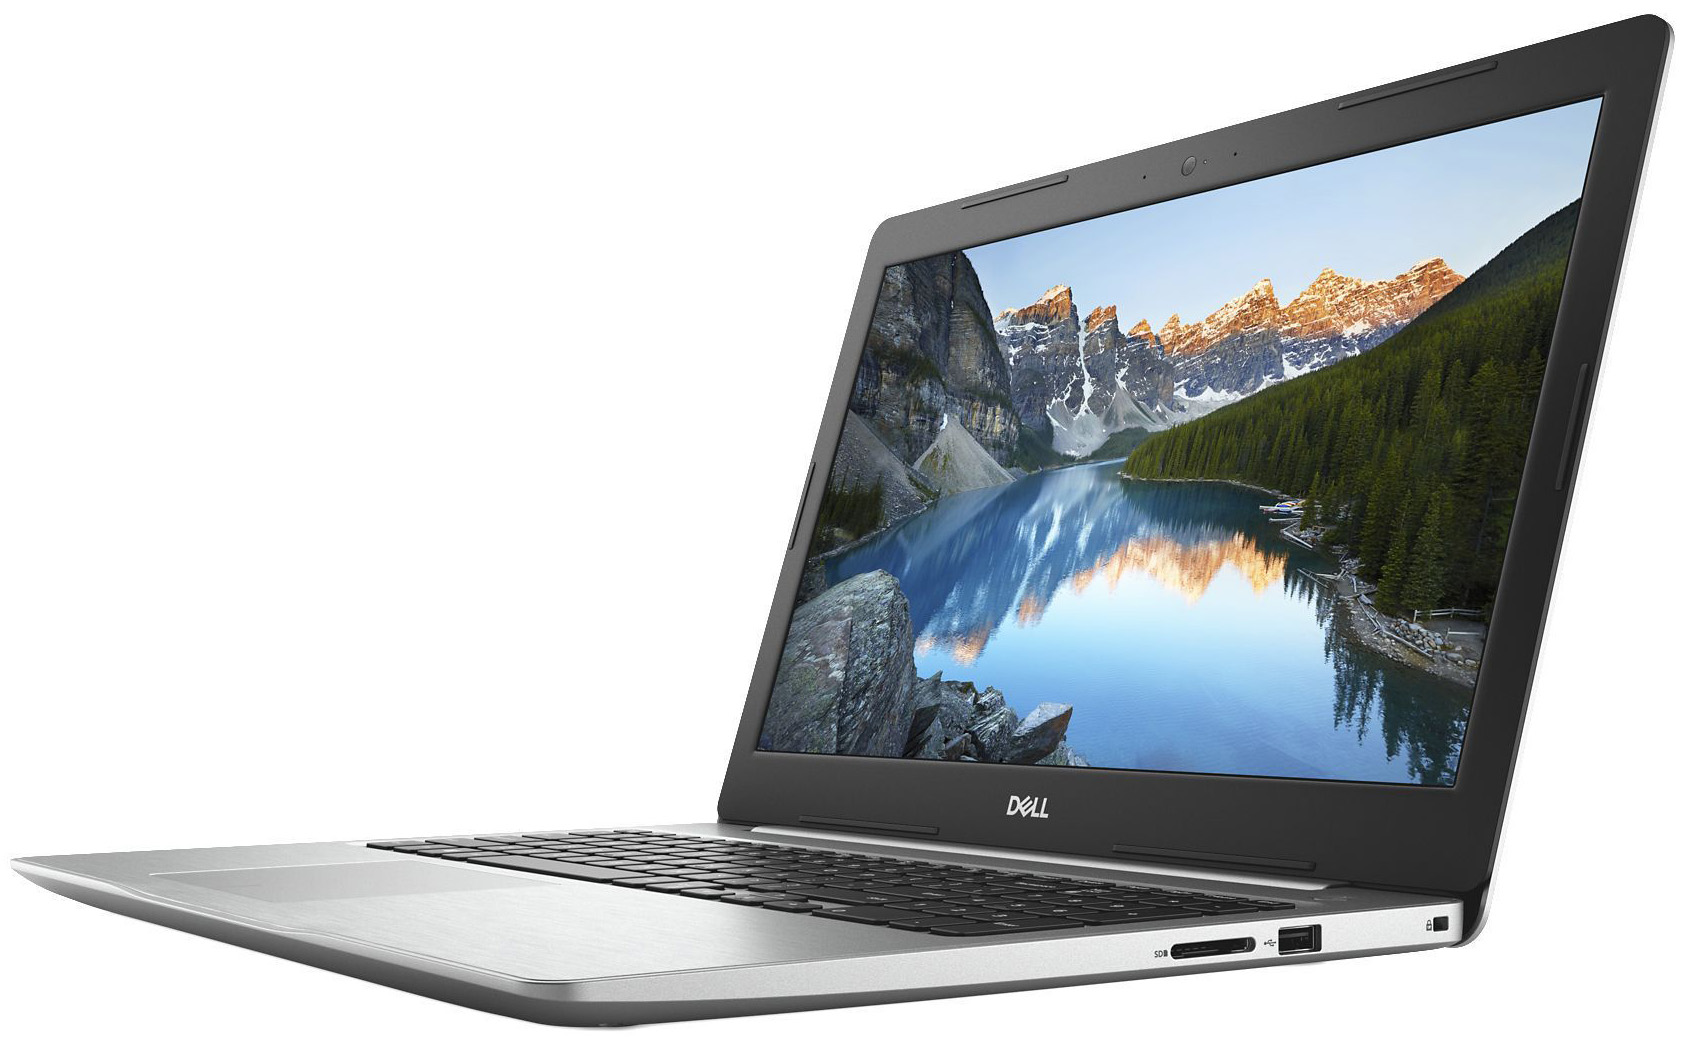 Dell Inspiron 15 5570 - Specs, Tests, and Prices | LaptopMedia Canada